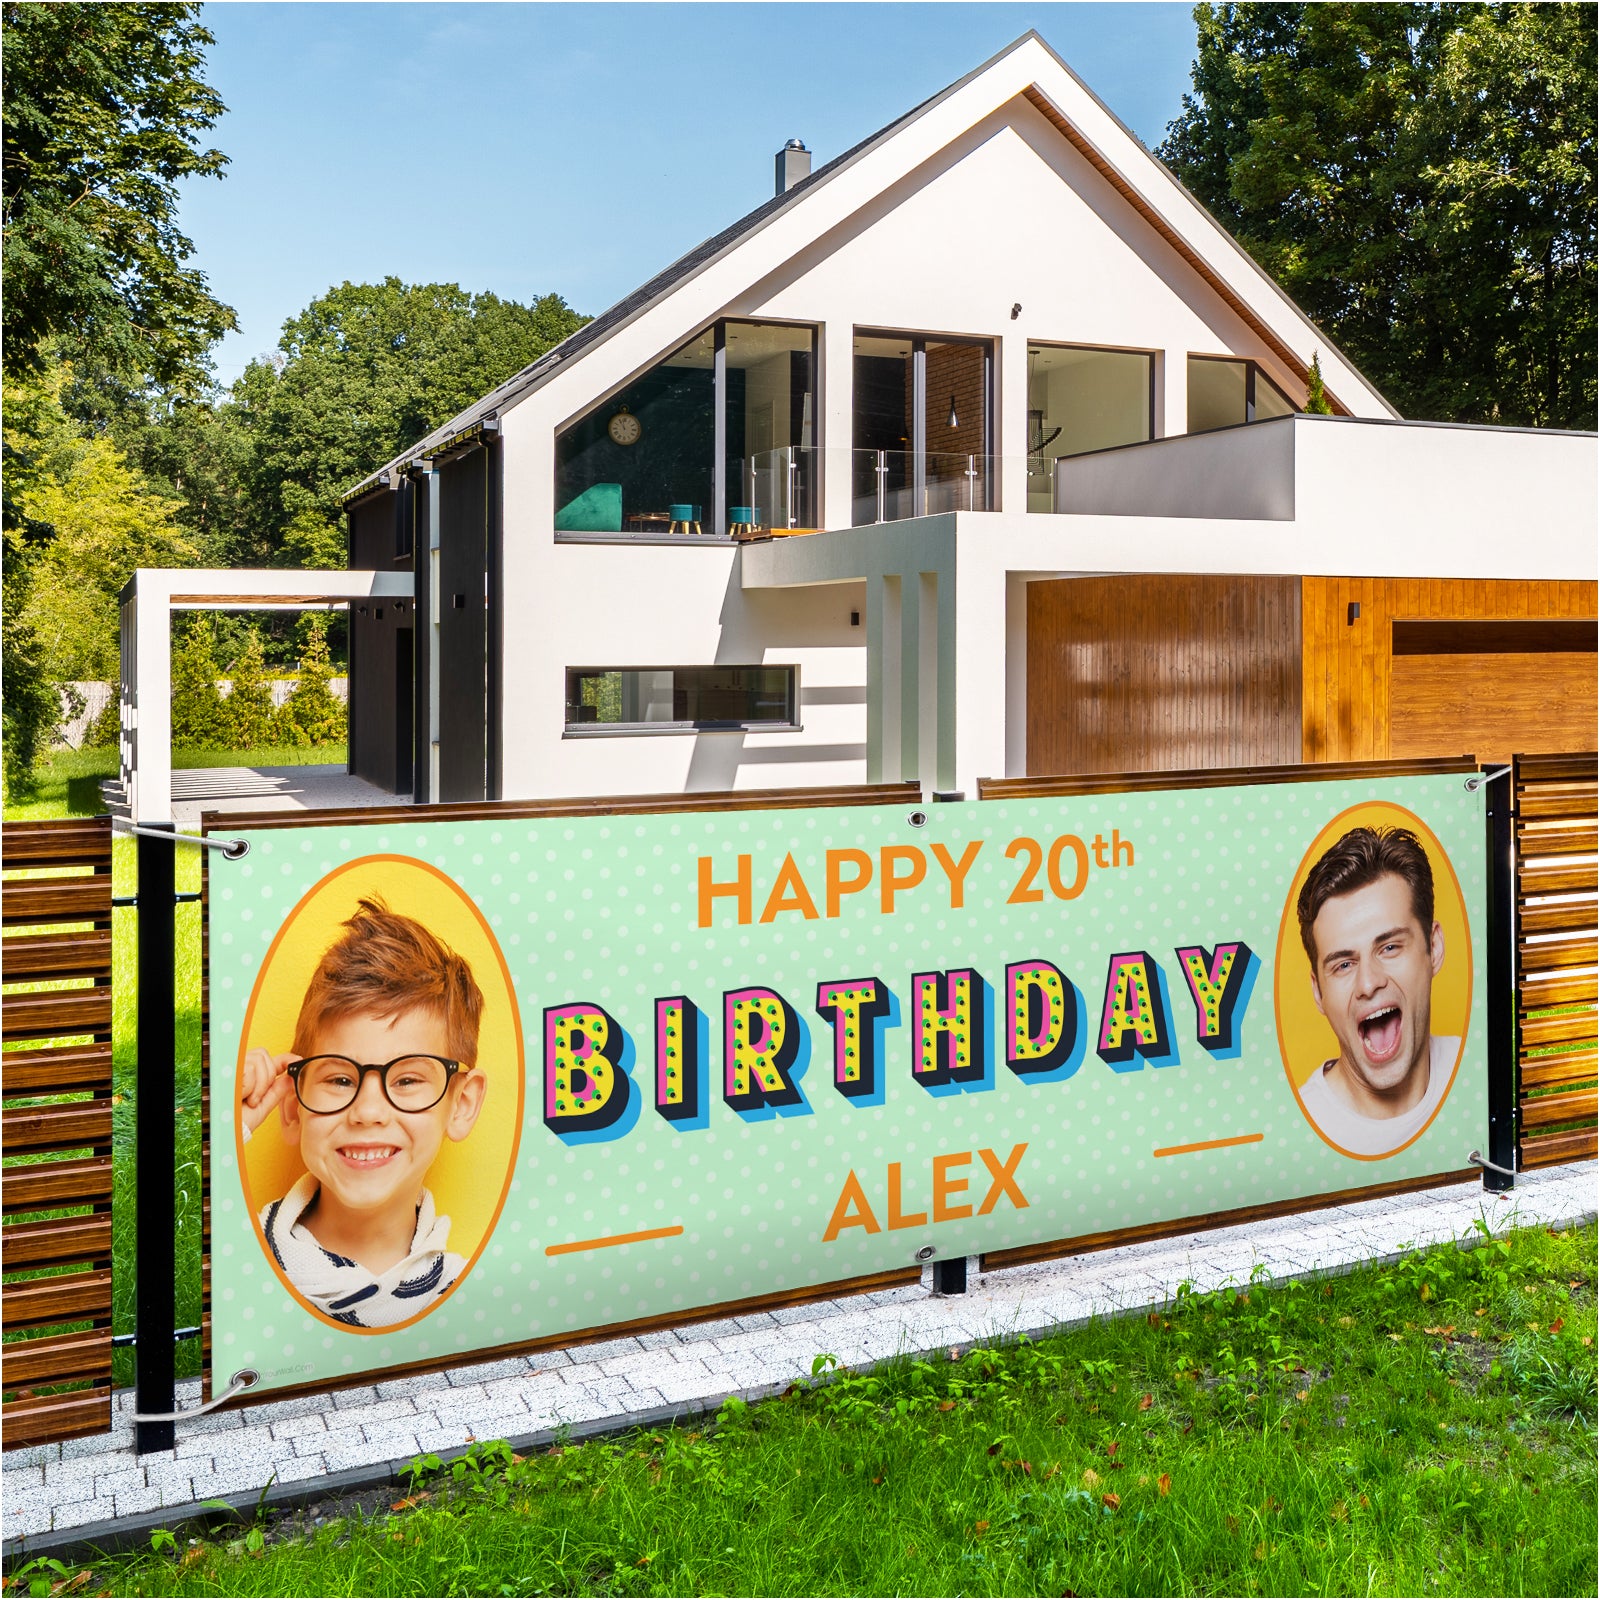 Personalised Birthday banners design